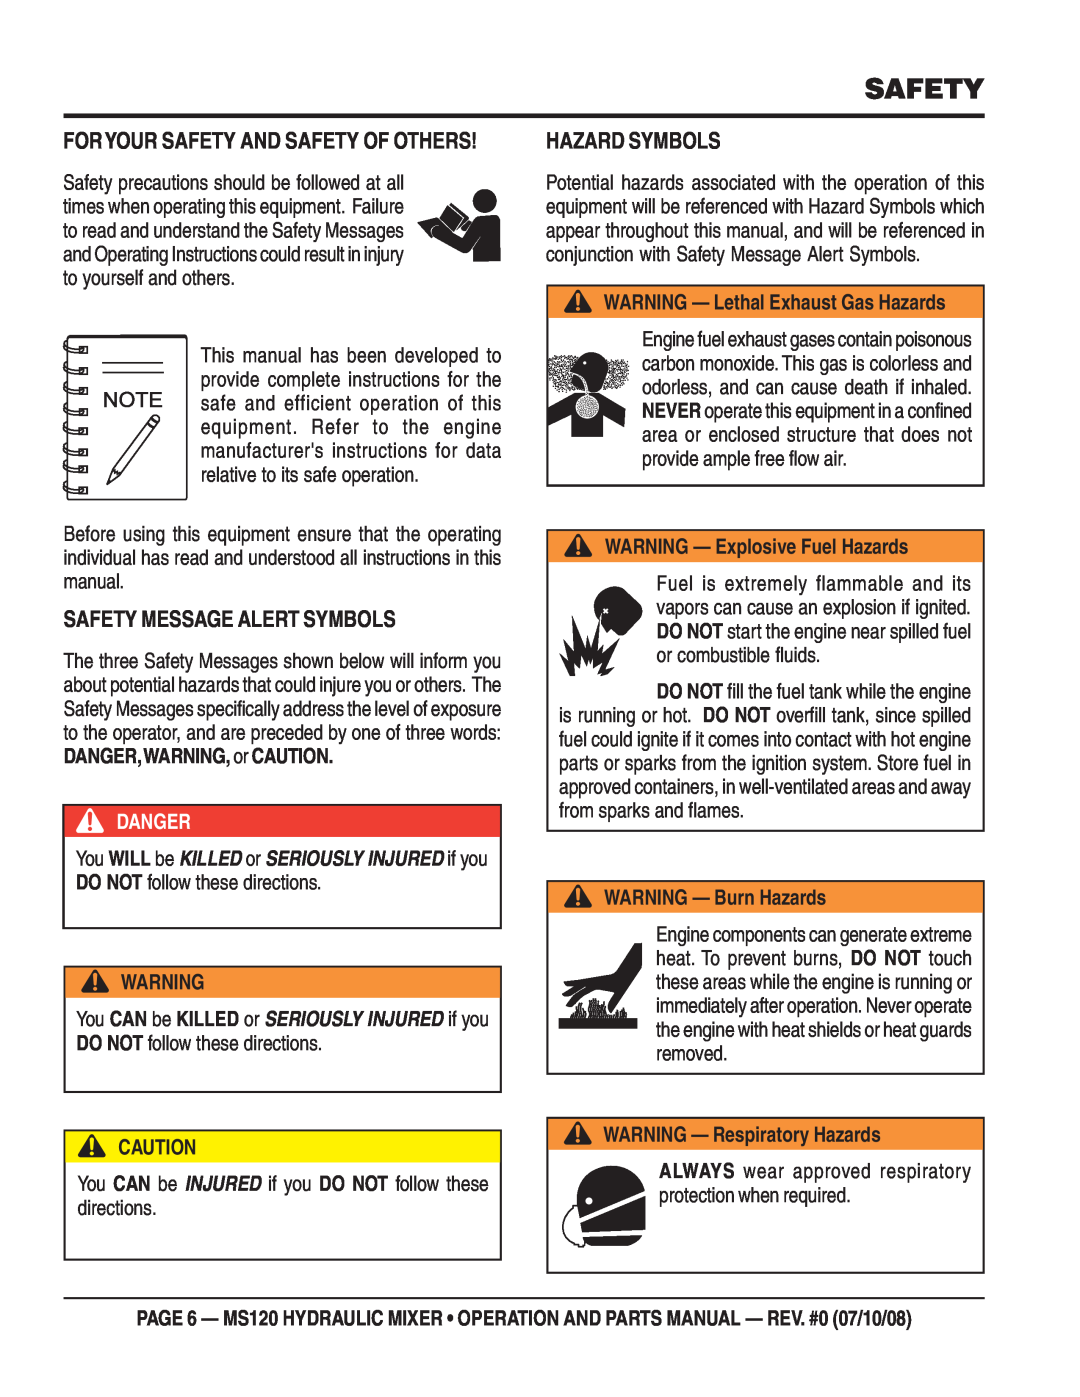 Stow MS120H13, MS120HD13 Safety Message Alert Symbols, Hazard Symbols, Foryour Safety And Safety Of Others, Danger 